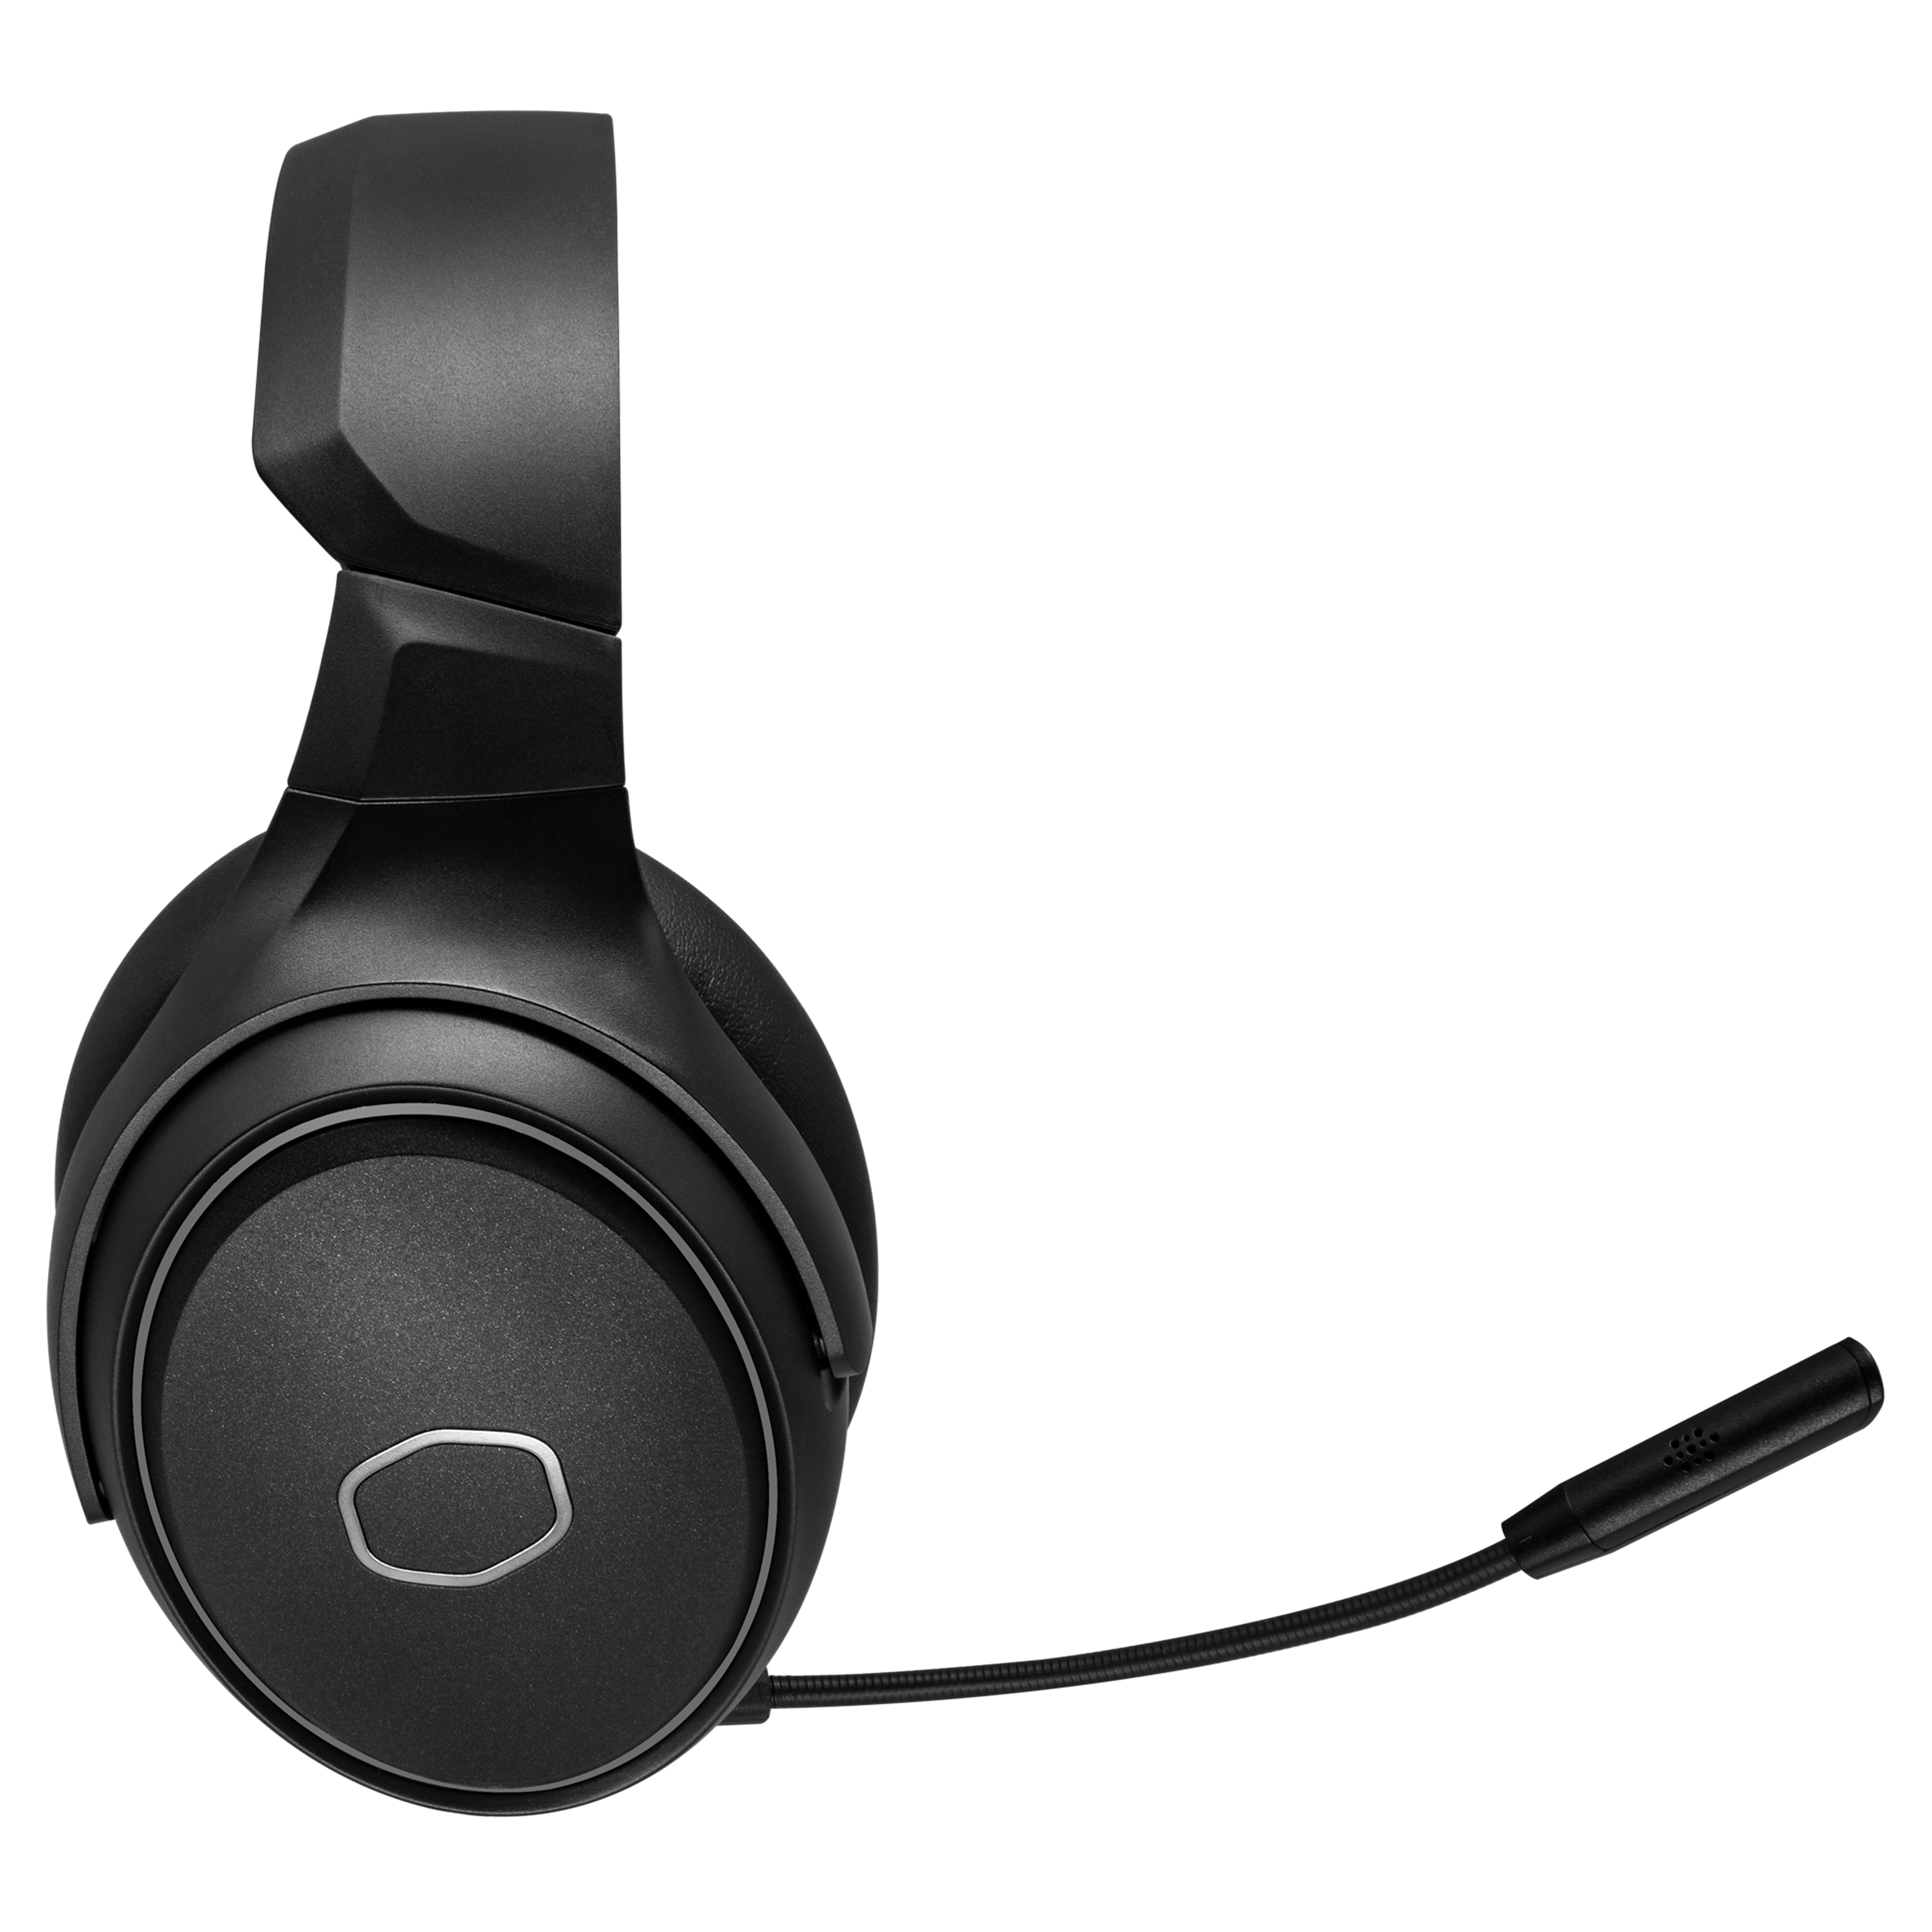 MH670 Gaming Headset